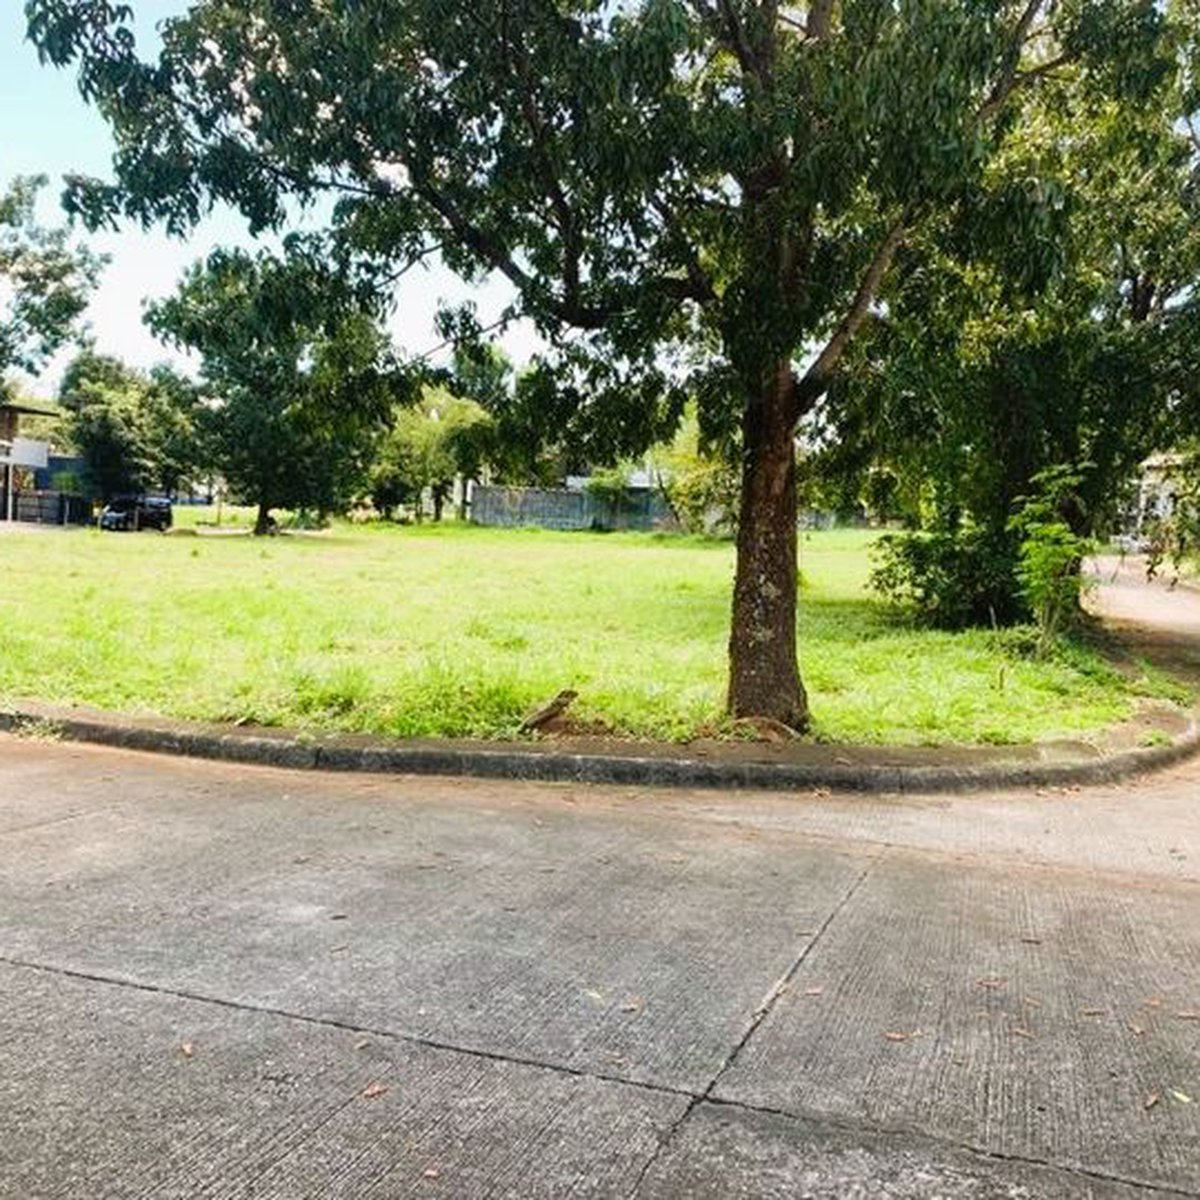 500 sqm Residential Lot For Sale in Antipolo Rizal